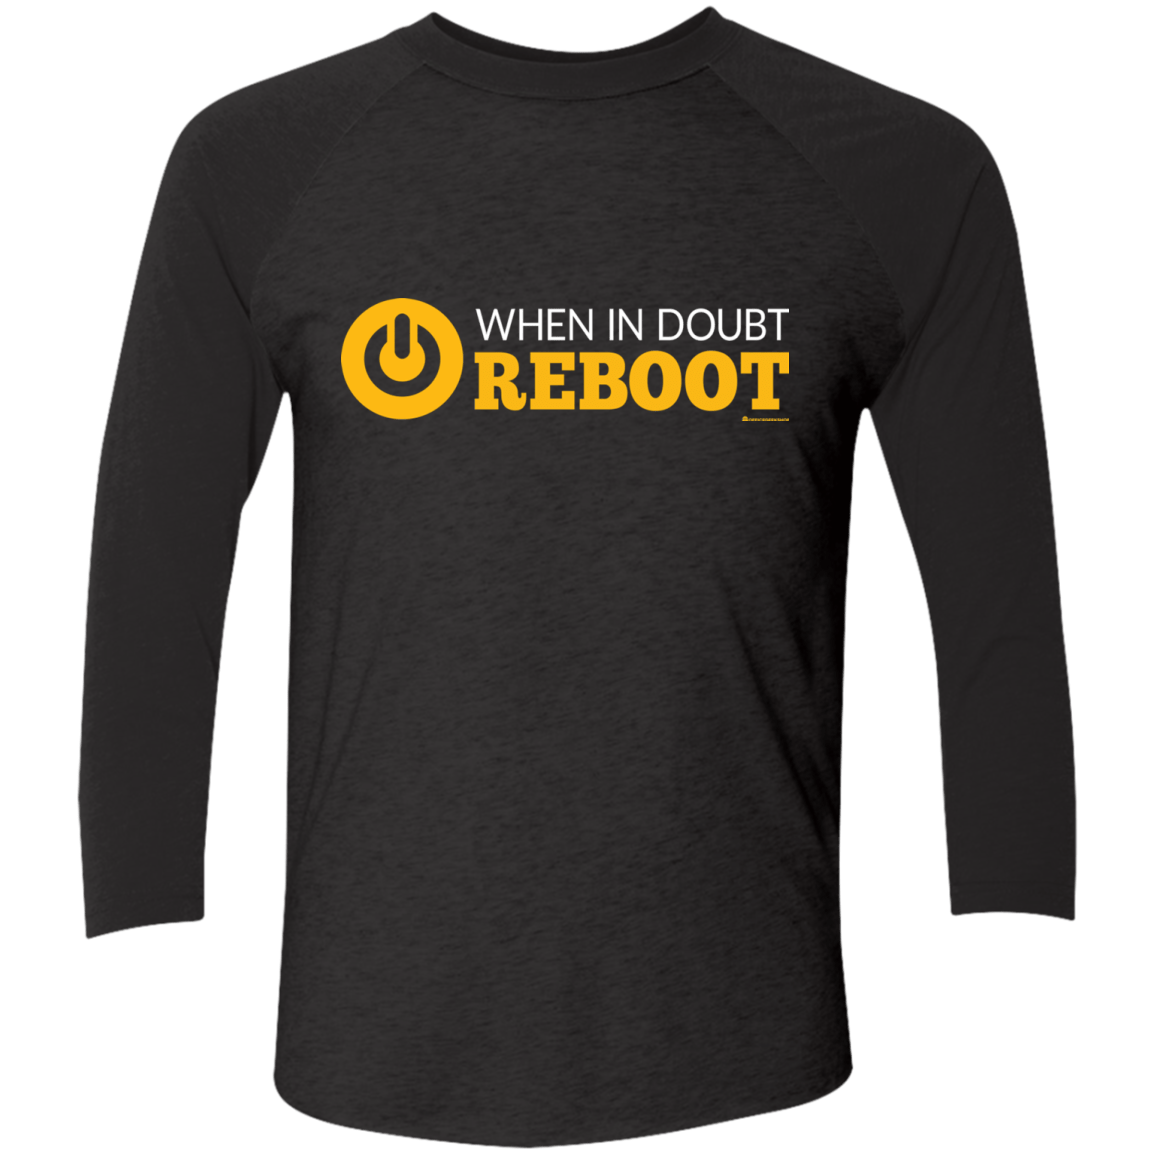 T-Shirts Vintage Black/Vintage Black / X-Small When In Doubt Reboot Men's Triblend 3/4 Sleeve